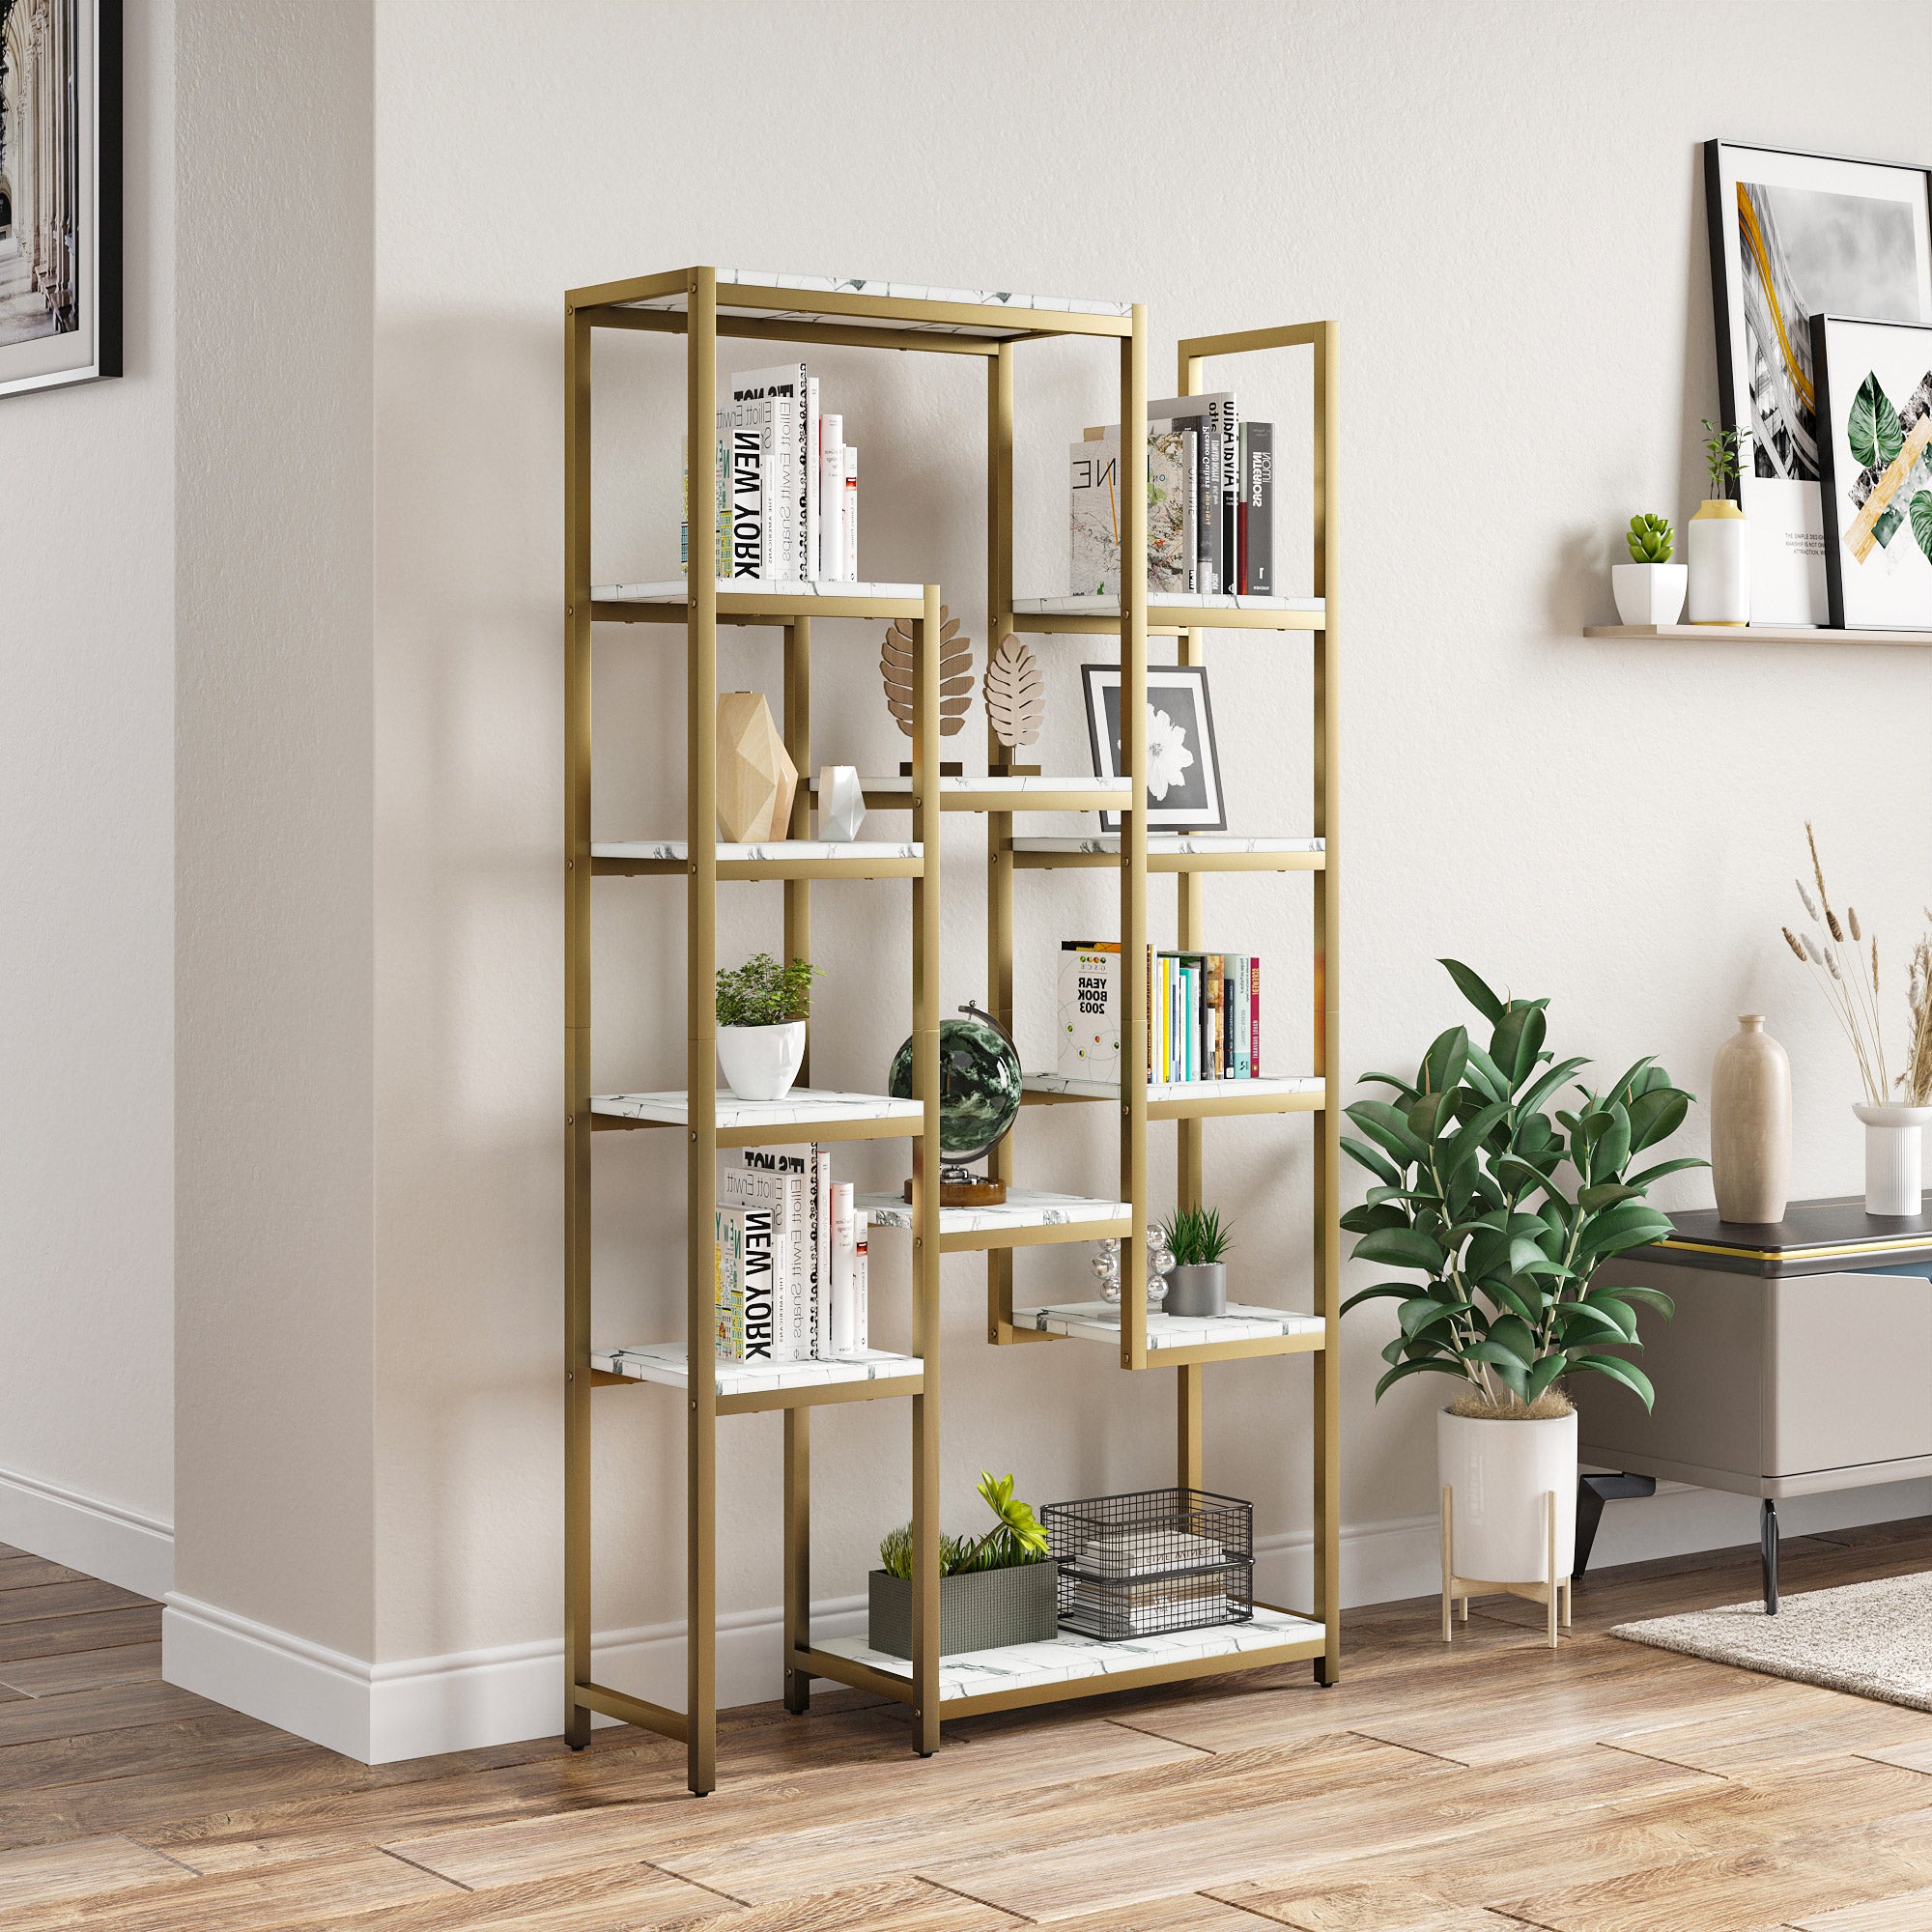 Odette 6 Tier Gold Bookshelf, 71” Tall Modern Free Standing Bookshelf with 12 Shelf Bookcase, Faux Marble Open Display Storage Book Shelves